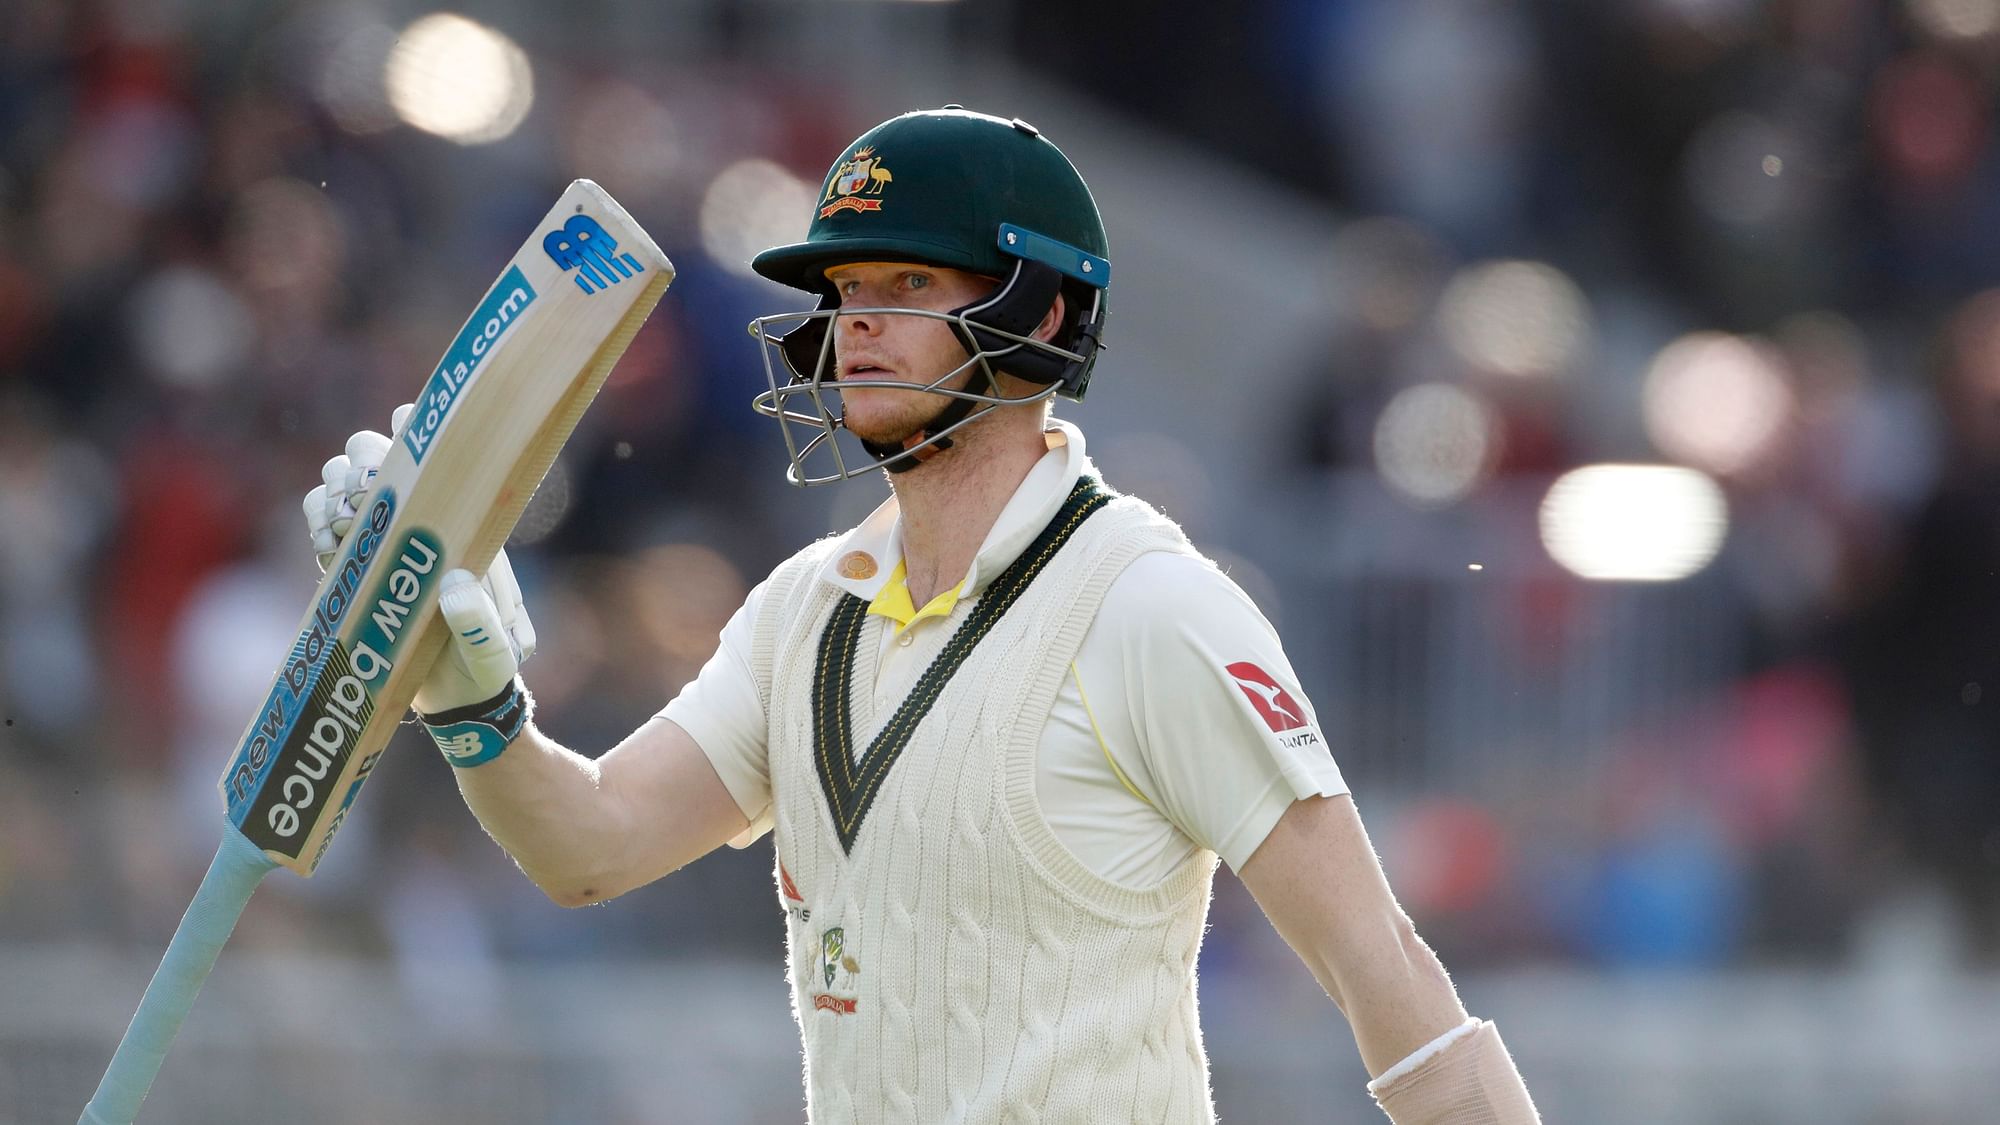 Premier Australia batsman Steve Smith on Friday made the slowest start in his Test career after he laboured for 39 balls before he got off the mark on Day One of the third and final Test against New Zealand being played at the Sydney Cricket Ground (SCG).